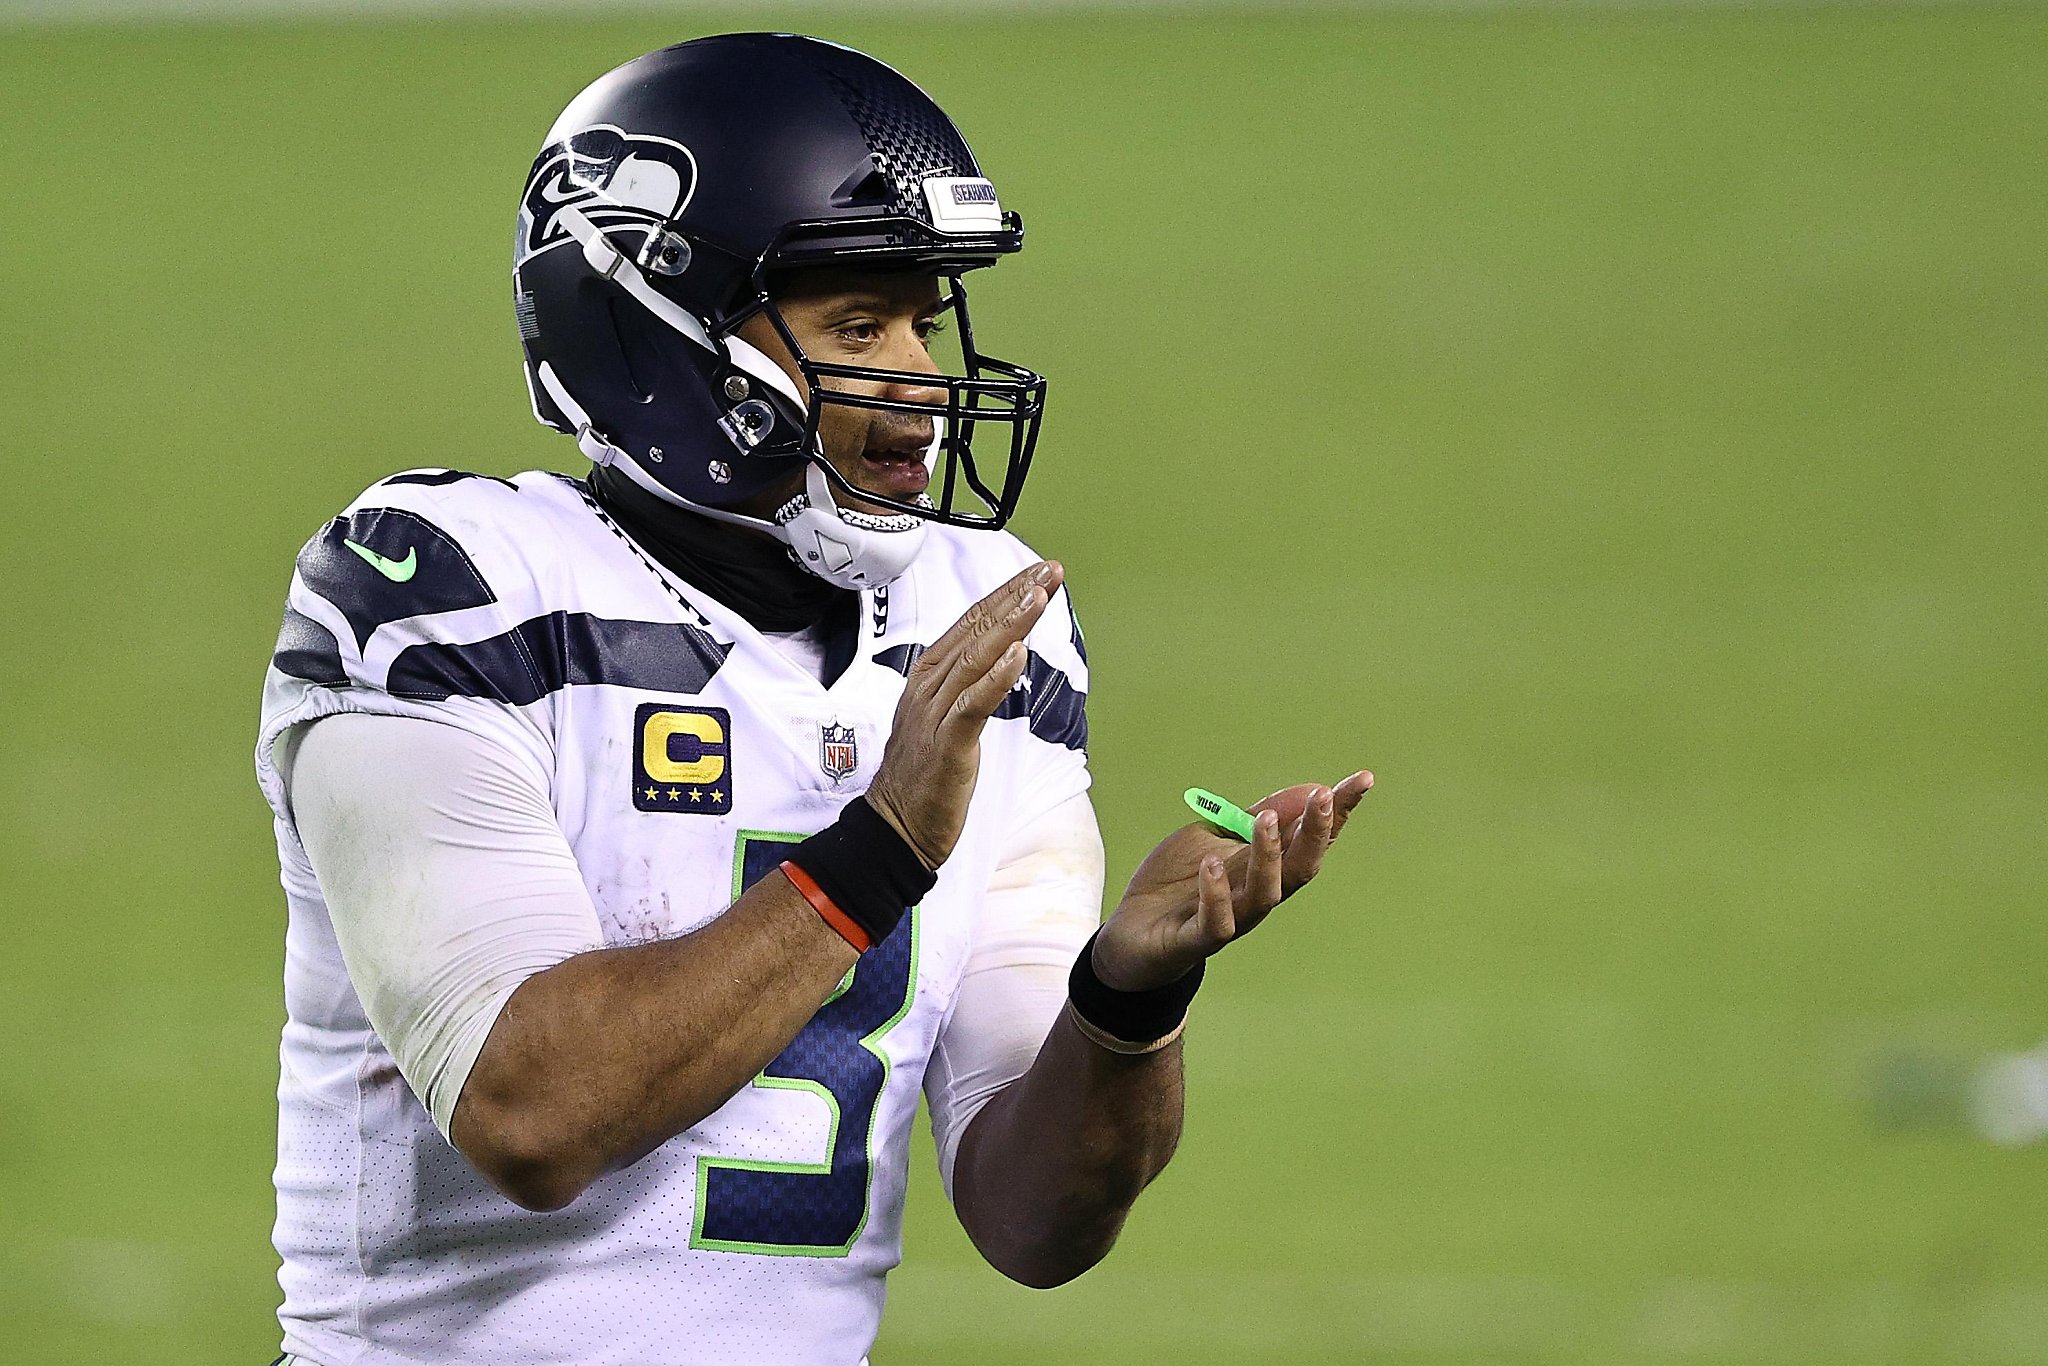 Seattle Seahawks QB Russell Wilson currently second in fan voting for